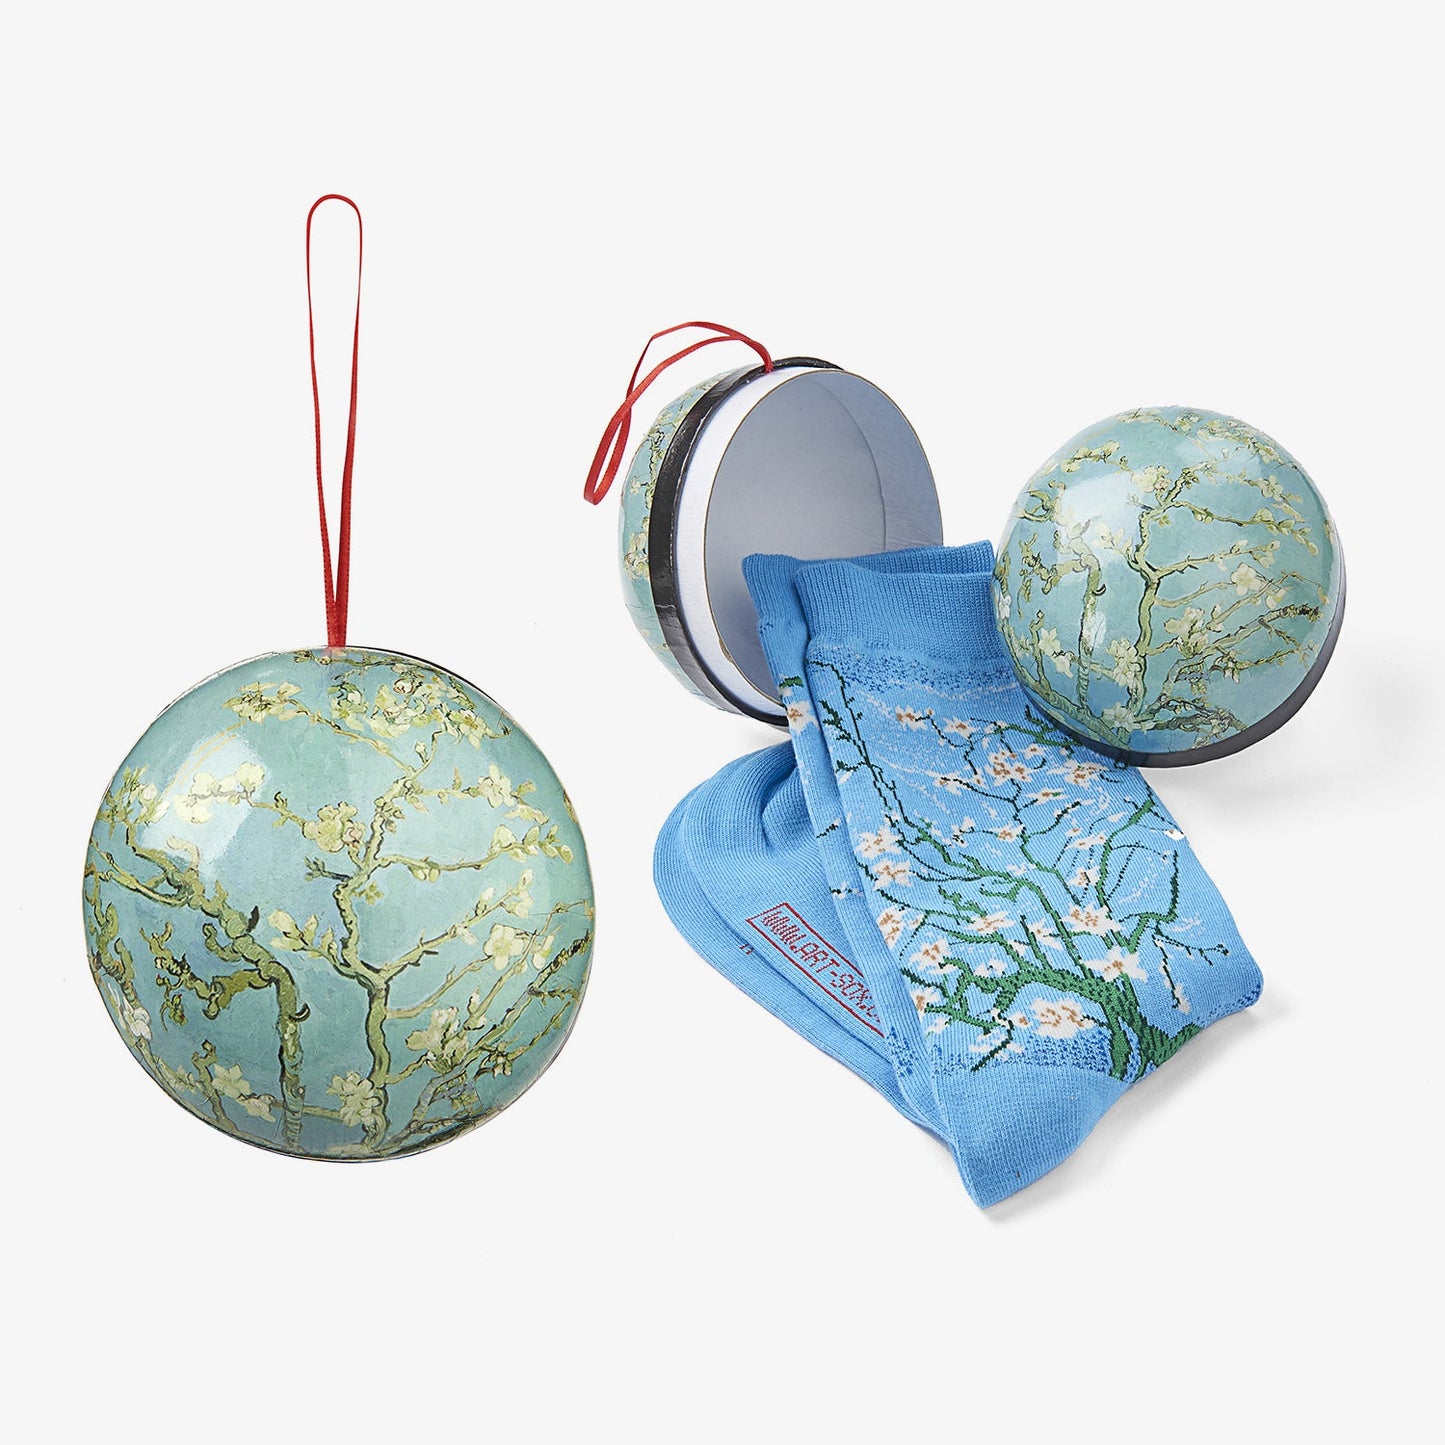 Gift ball - Vincent van Gogh, blooming almond branches